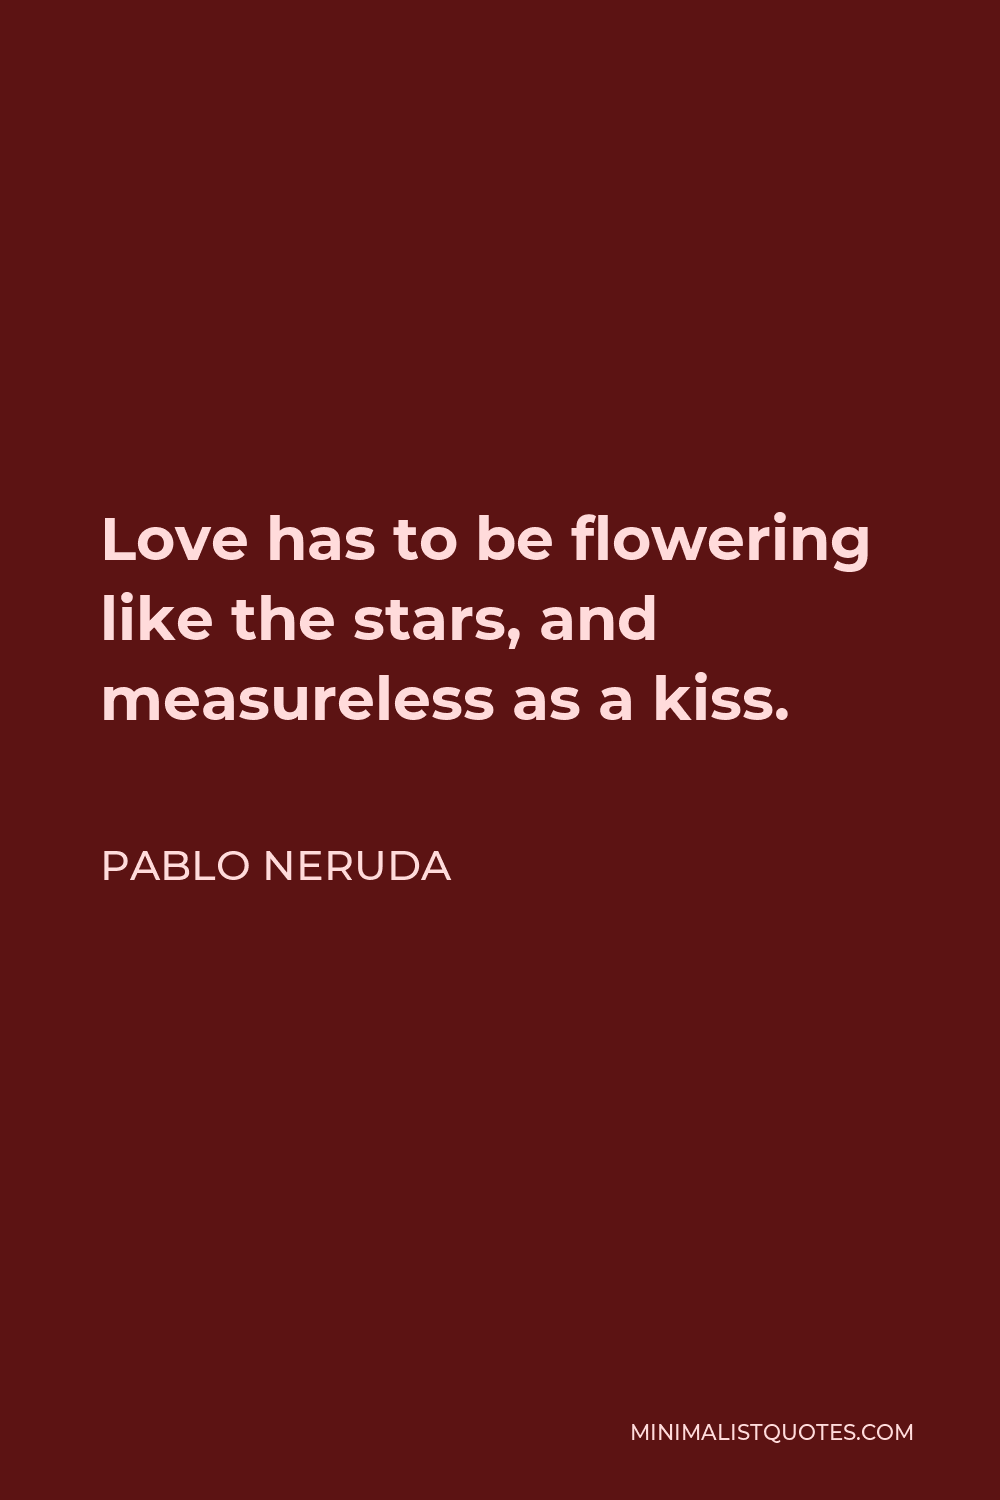 Pablo Neruda Quote - Love has to be flowering like the stars, and measureless as a kiss.